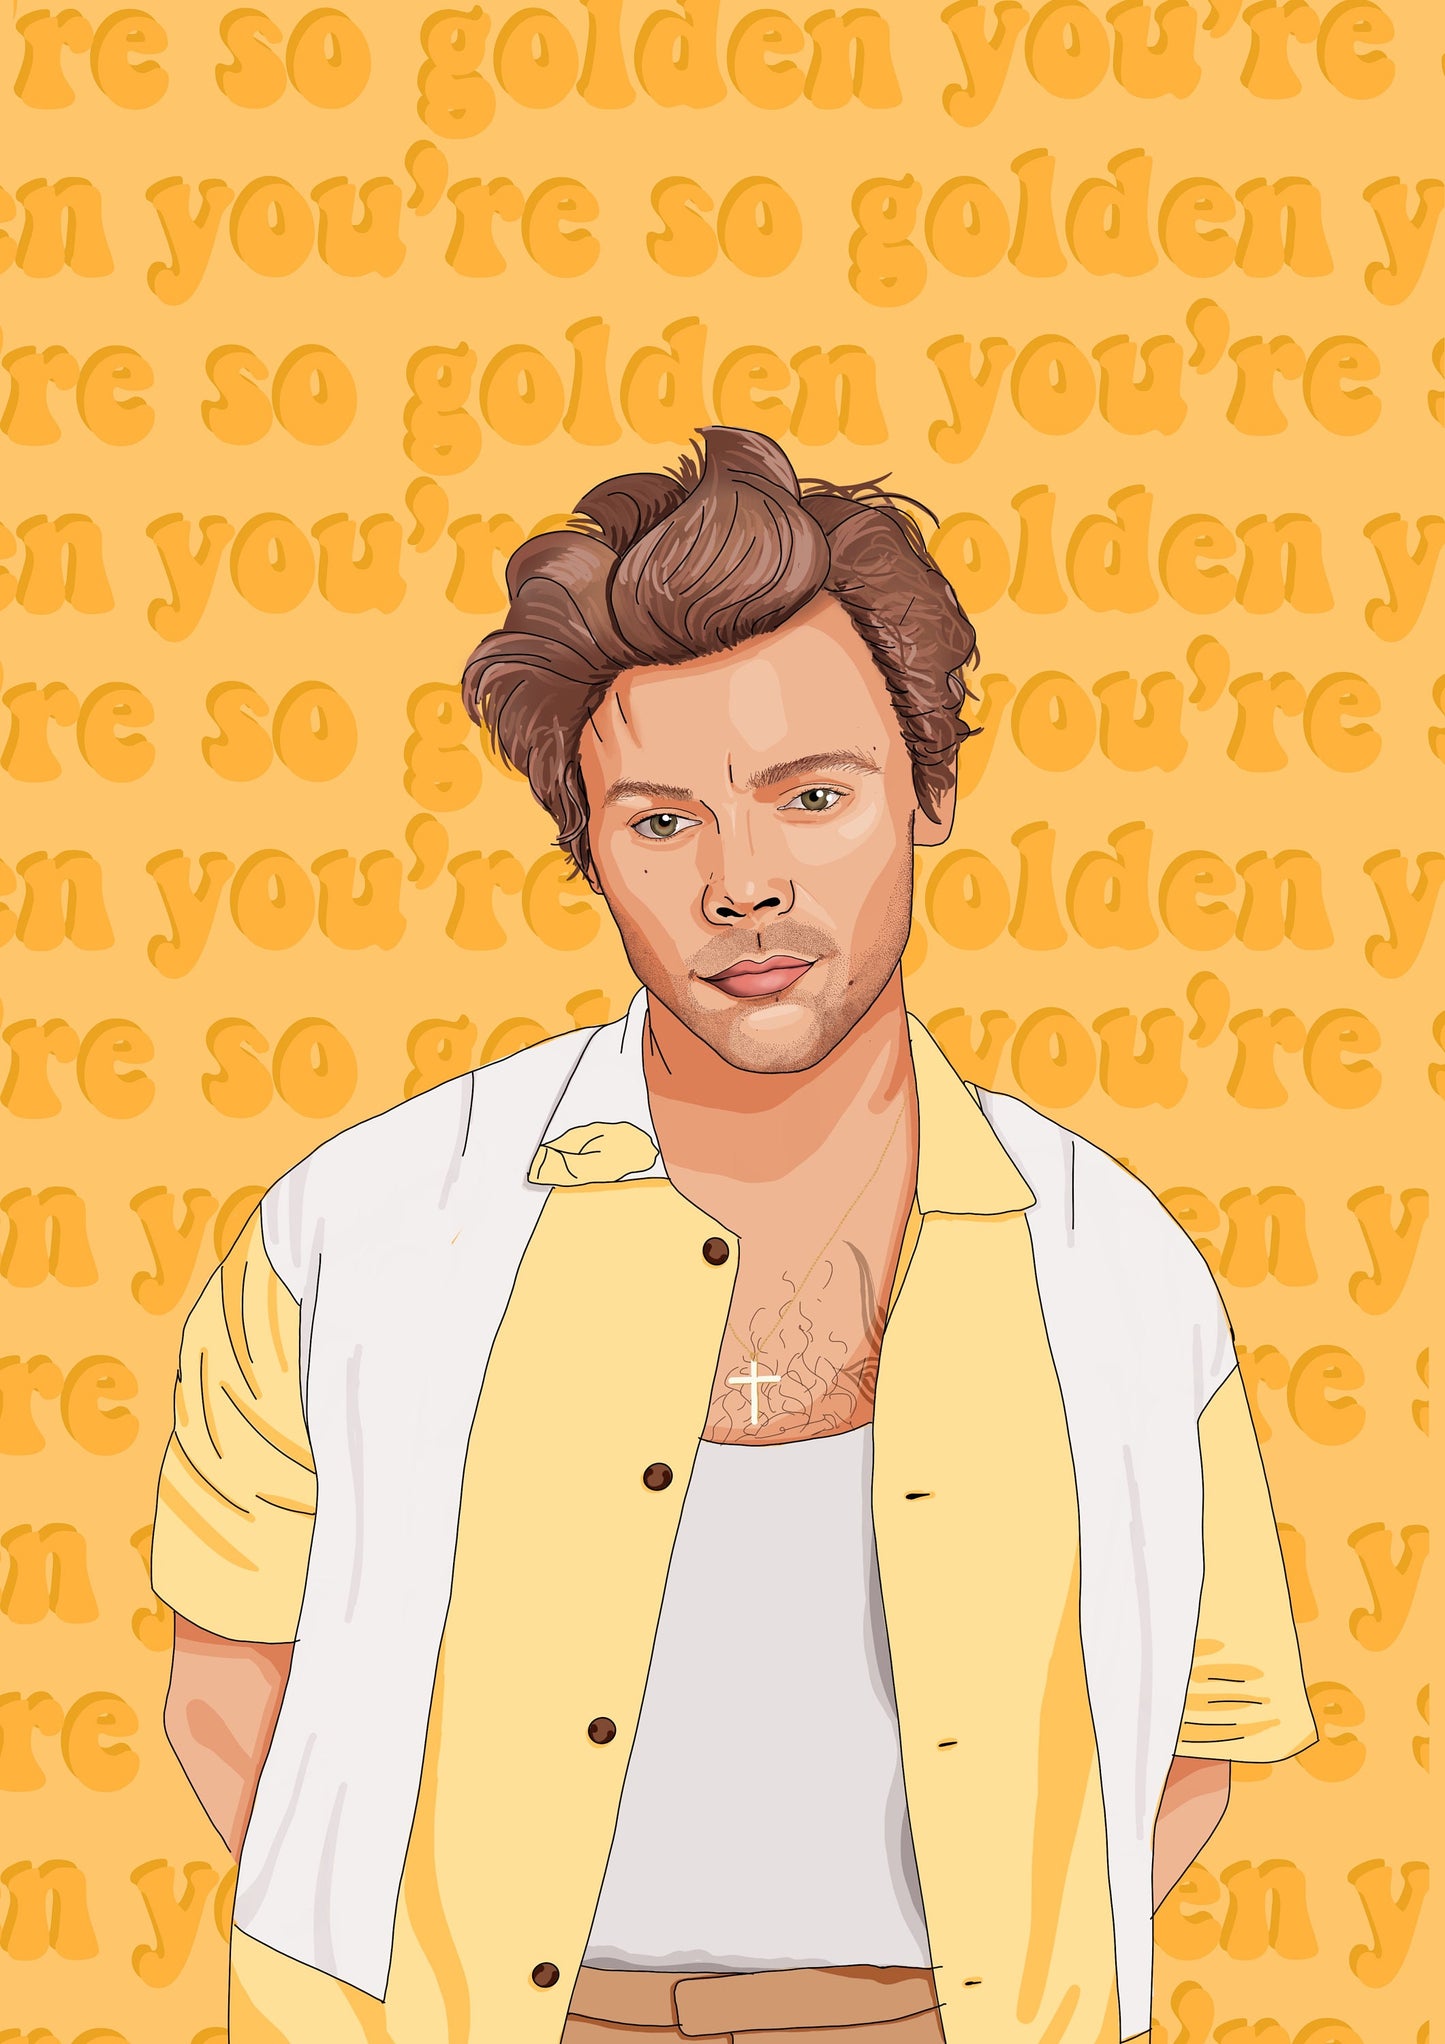 You're So Golden Print | Harry Styles Print